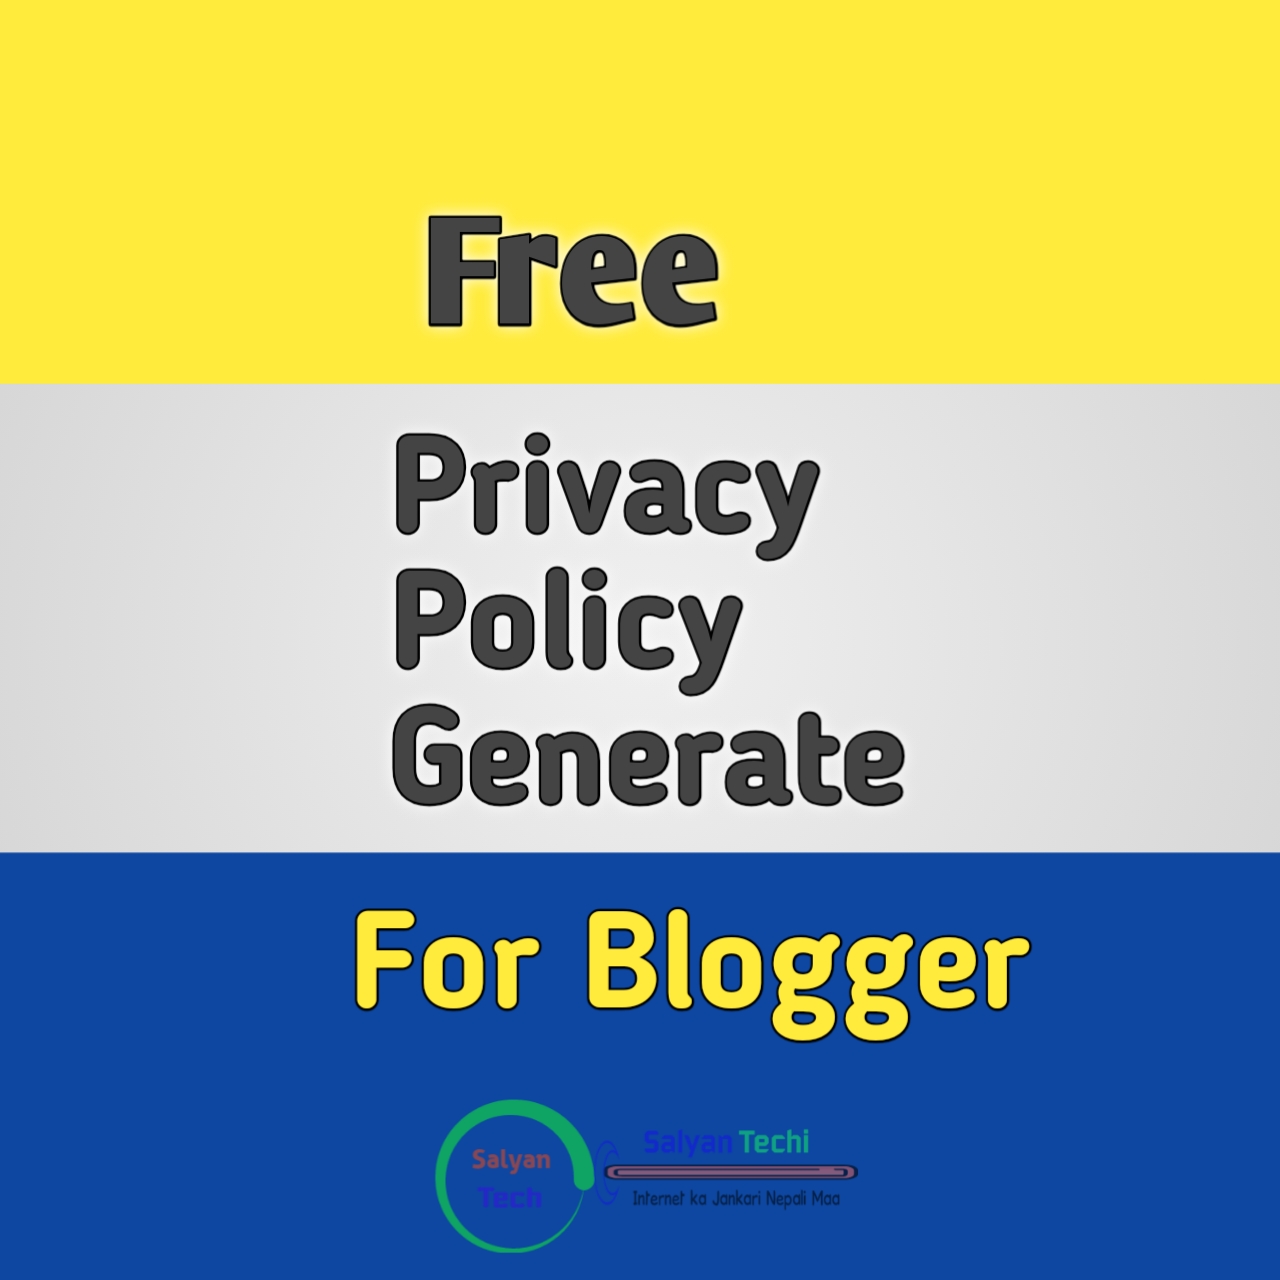 Free Privacy Policy Generate For Blogger 2019 cover image